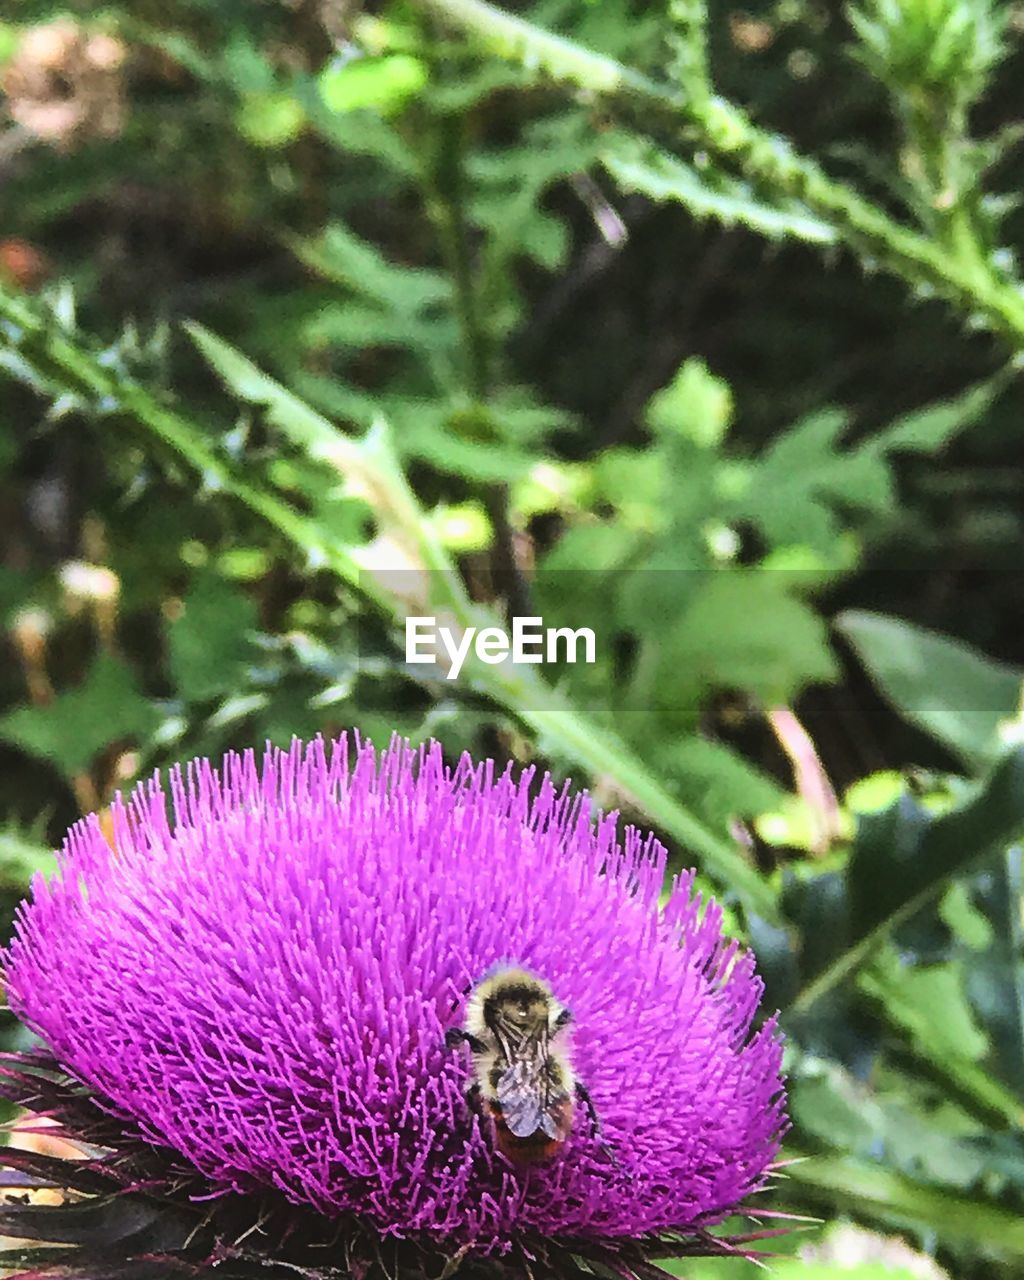 CLOSE-UP OF BEE POLLINATING ON PURPLE THISTLE FLOWER